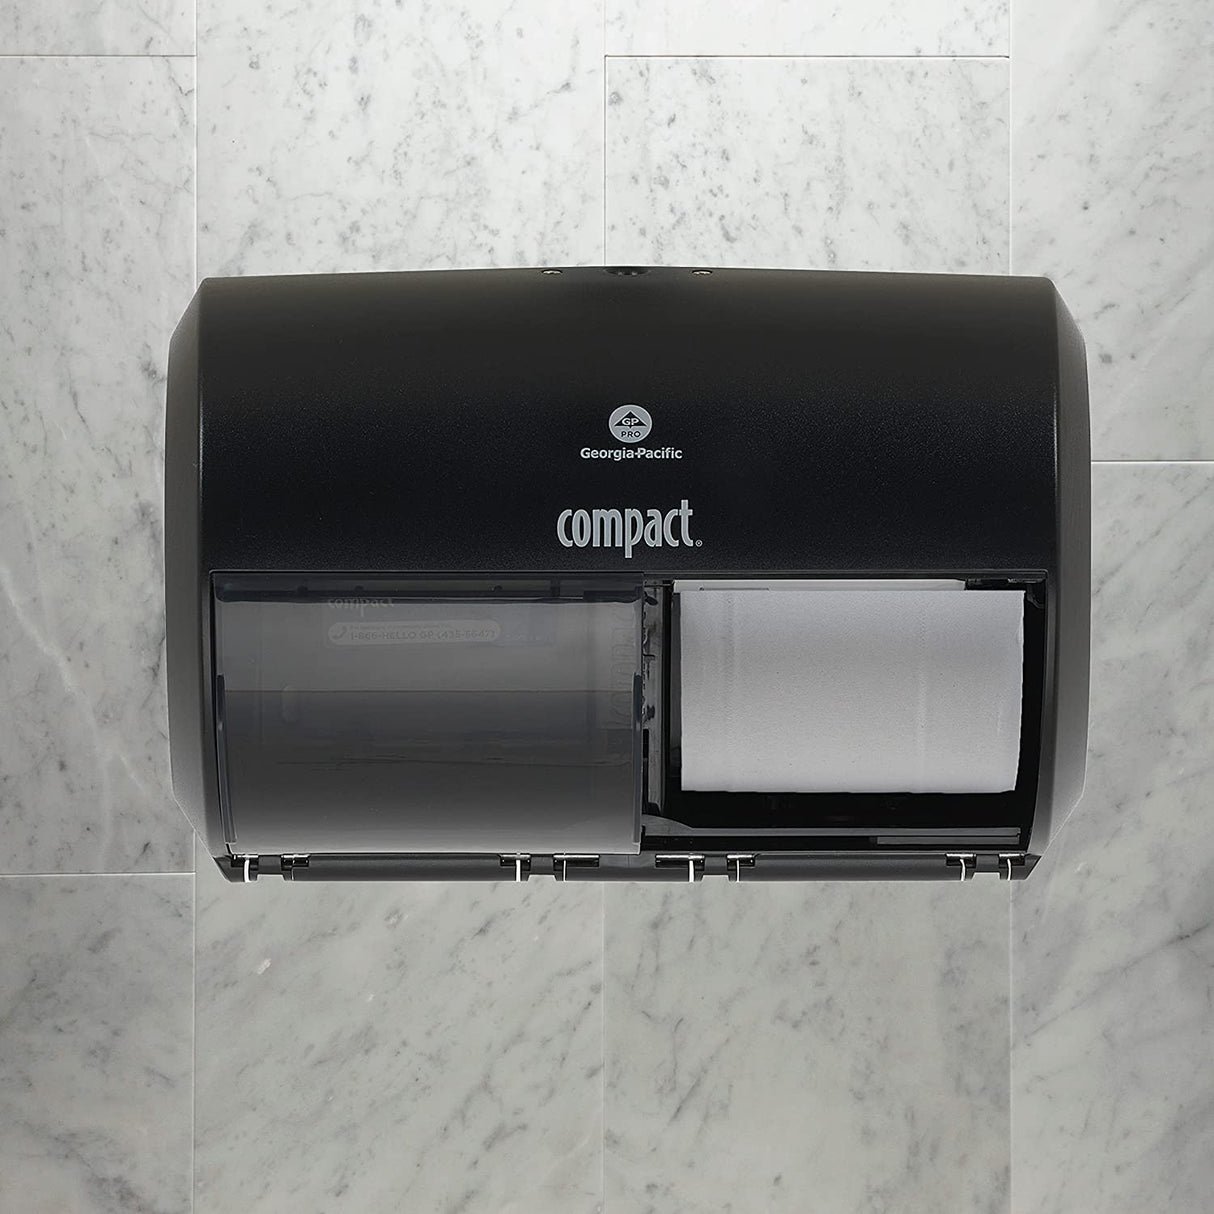 Compact 2-Roll Side-by-Side Coreless Toilet Paper Dispenser